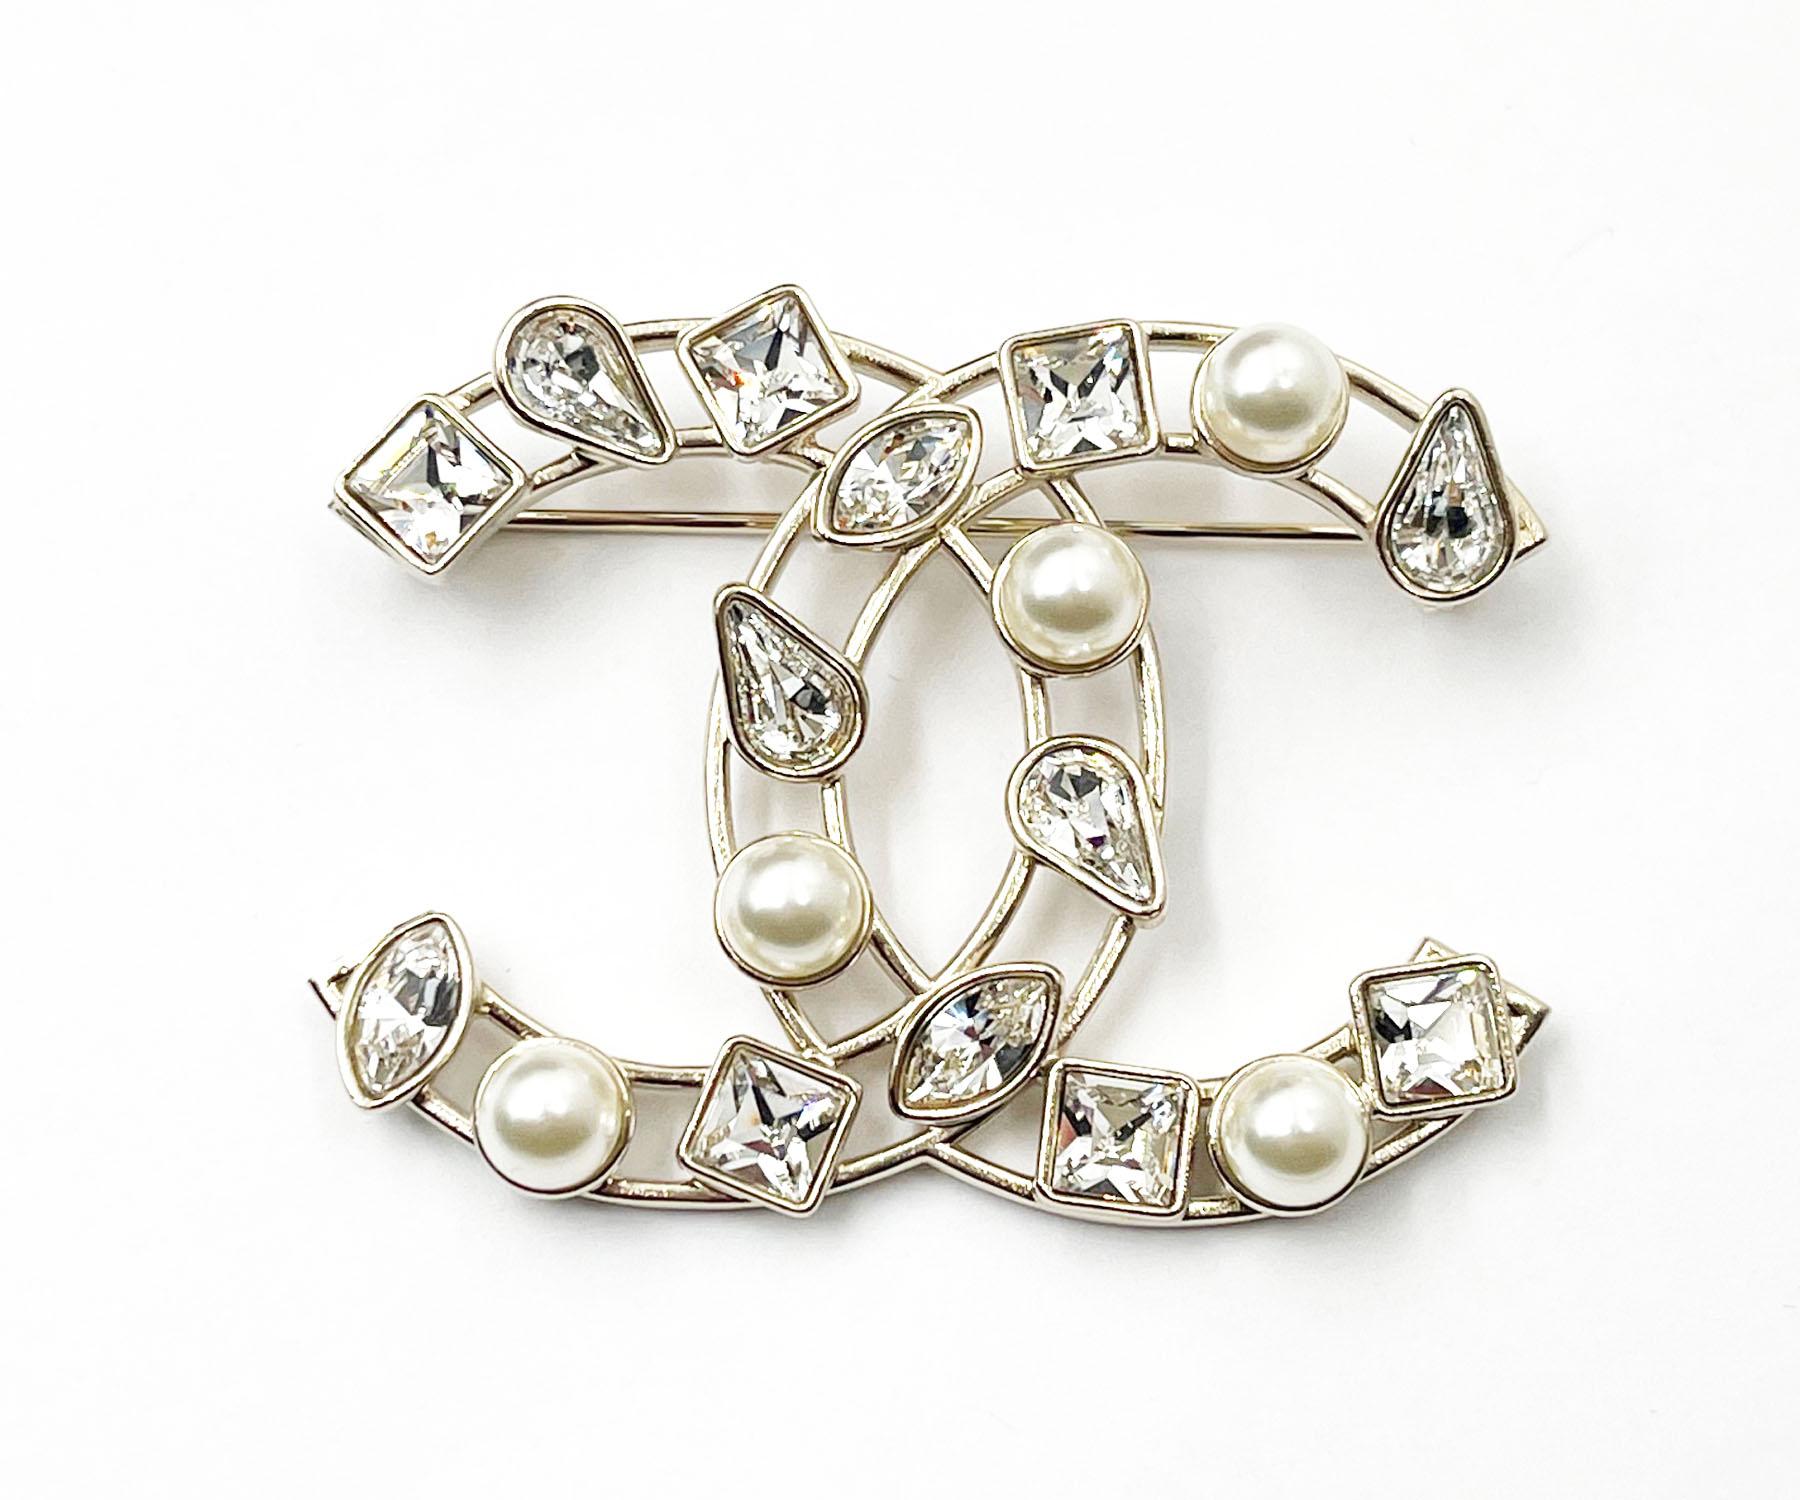 Chanel Gold CC Tear Drop Princess Crystal Pearl Brooch

*Marked 19
*Made in Italy
*Comes with the original box

-It is approximately 1